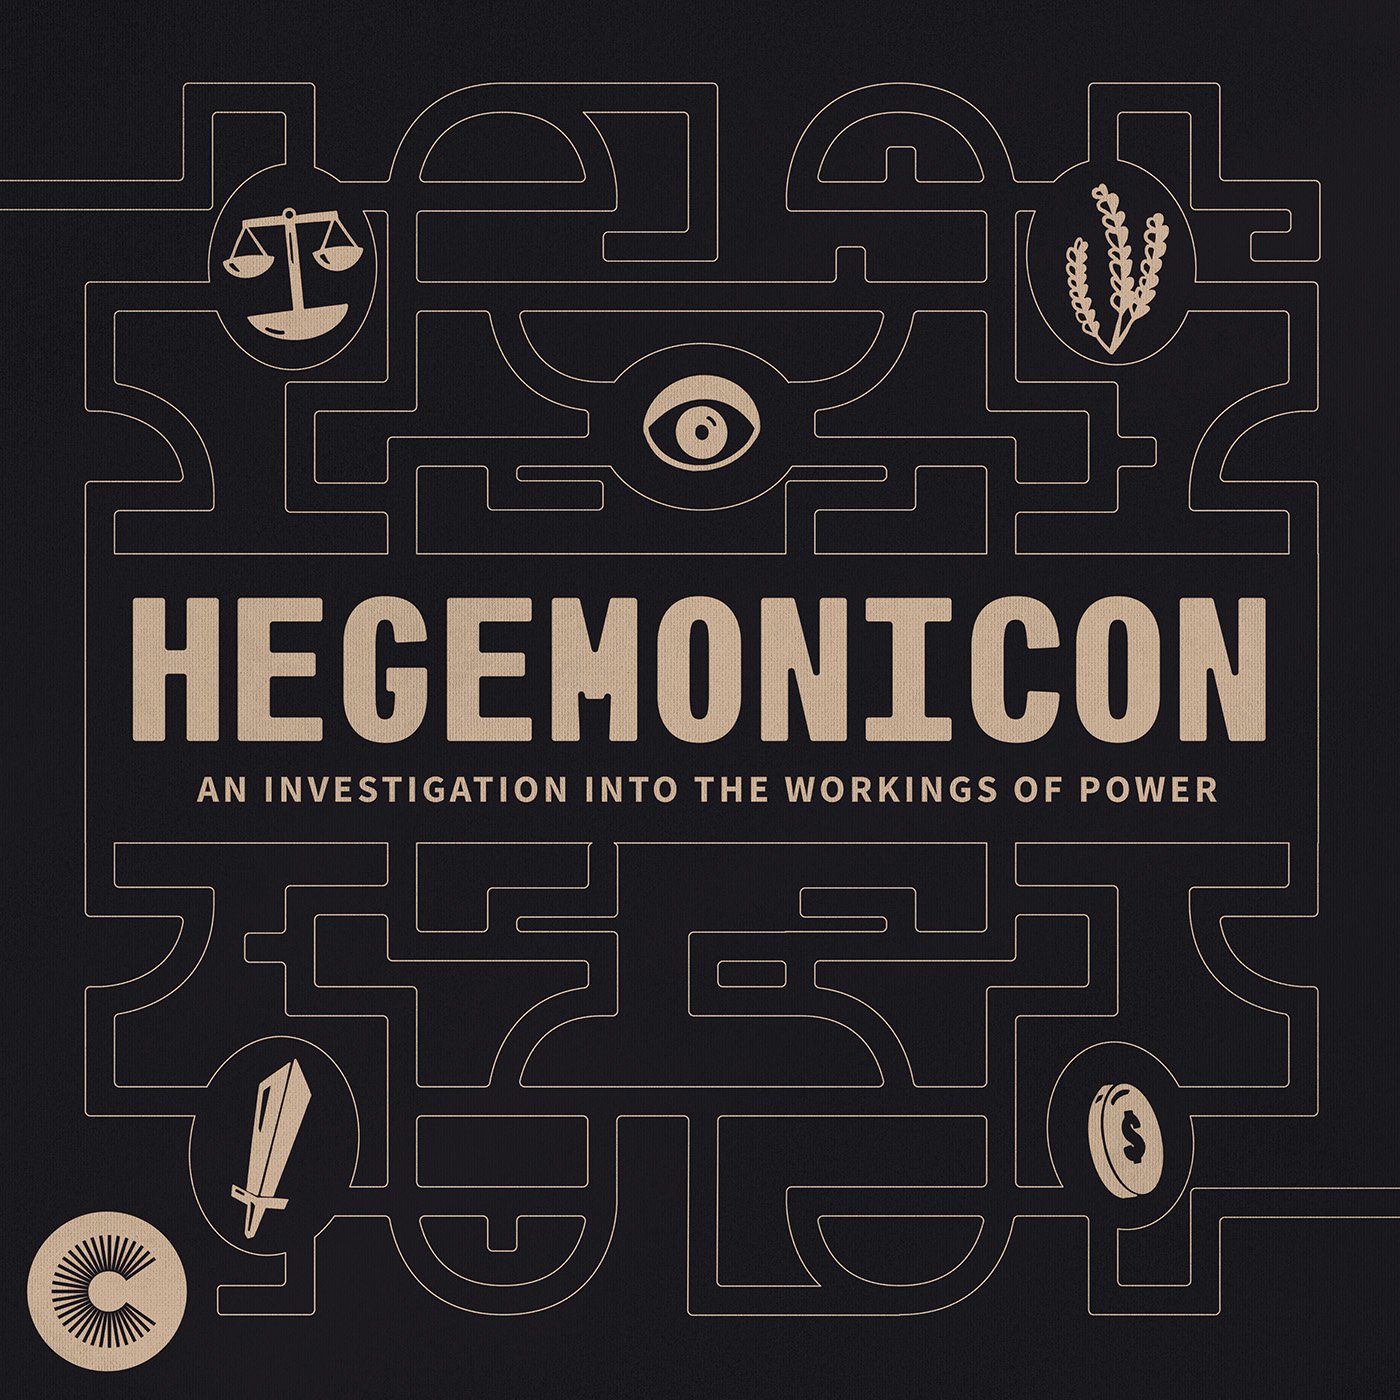 A maze featuring icons of scales, an eye, crops, a sword, and a coin with text "Hegemonicon"